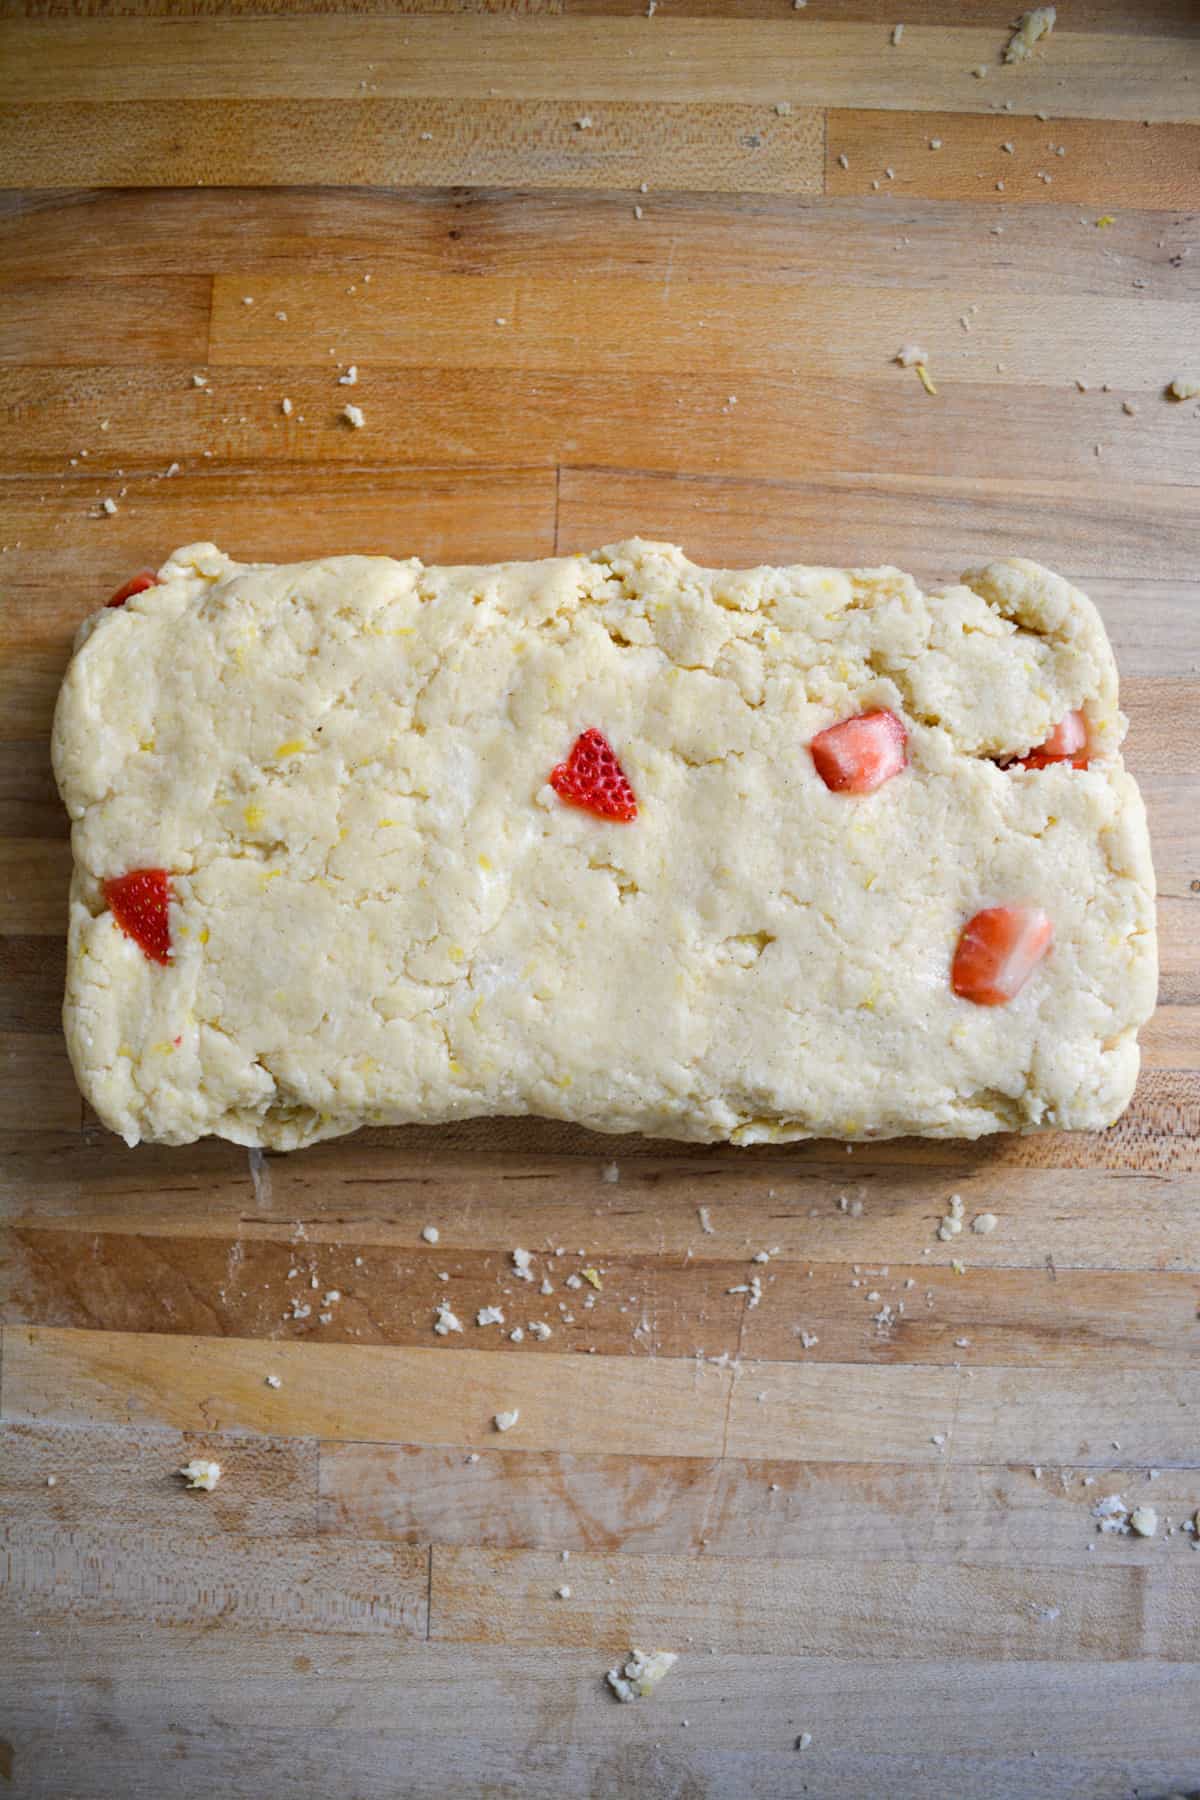 Vegan Lemon Strawberry Scone dough patted into a rectangle on a wooden surface.